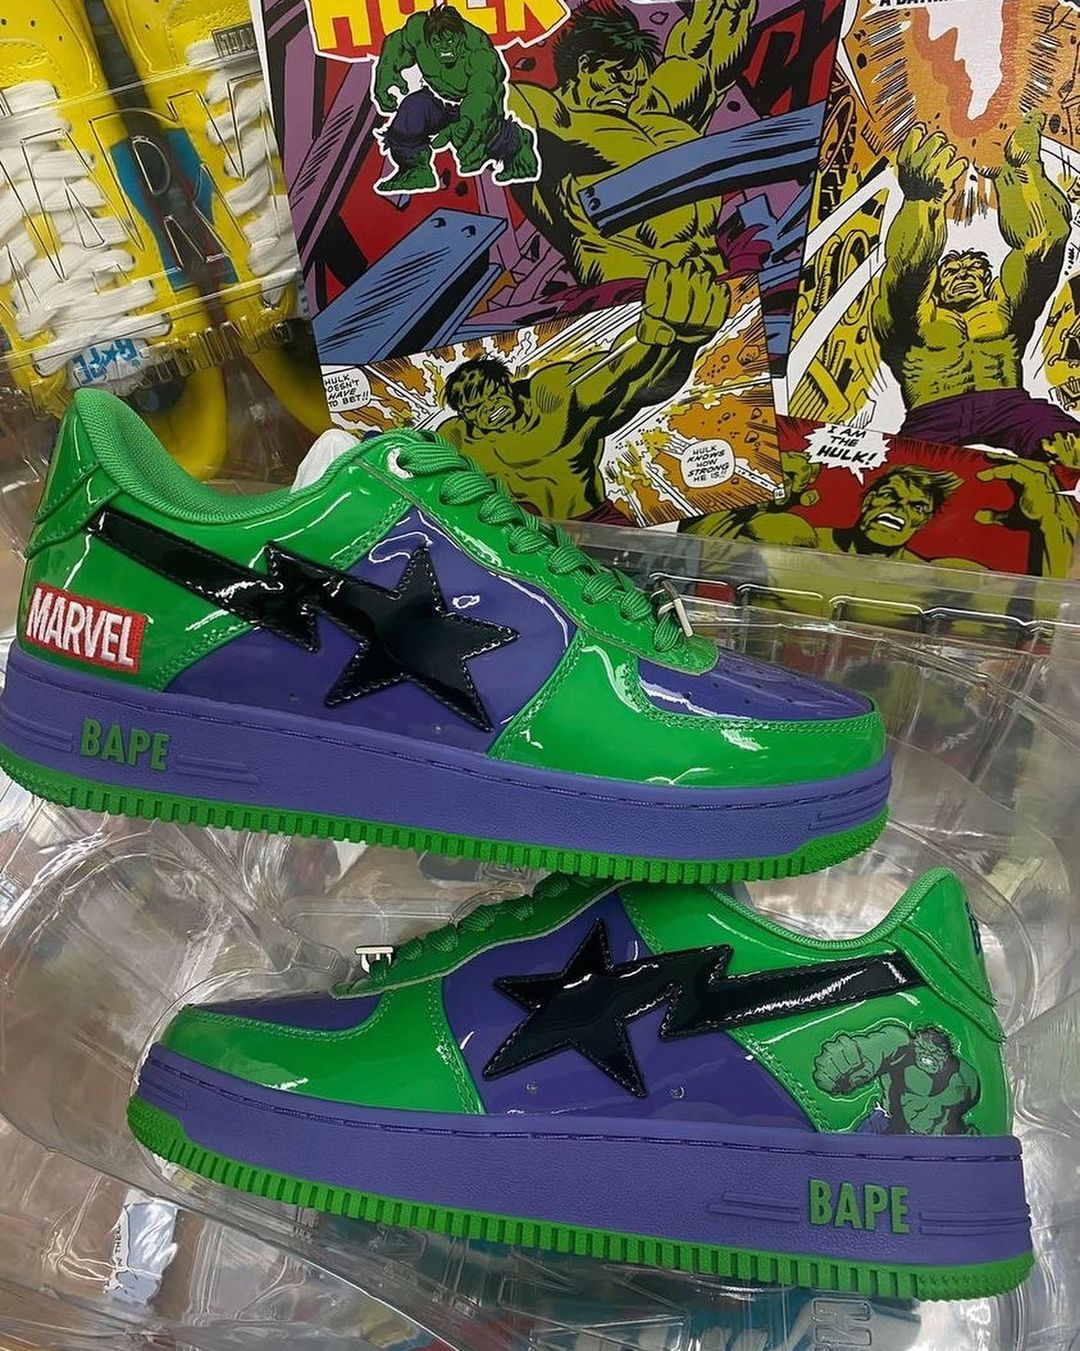 Marvel x Bape Sta 2022 Collection Release Date + Where to Buy